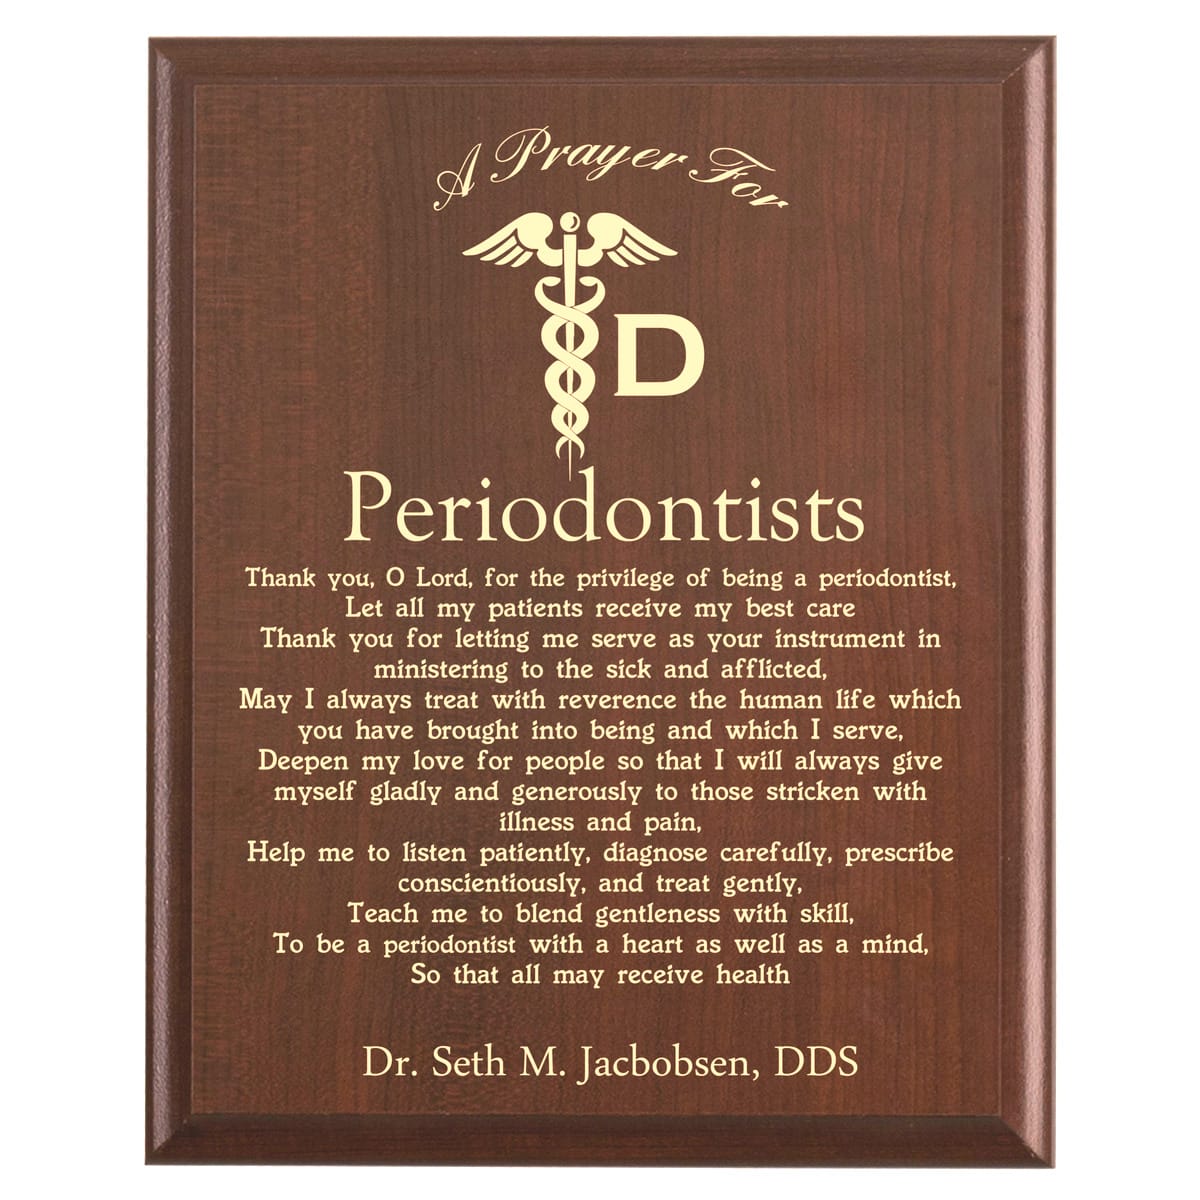 Plaque photo: Periodontist Prayer Plaque design with free personalization. Wood style finish with customized text.